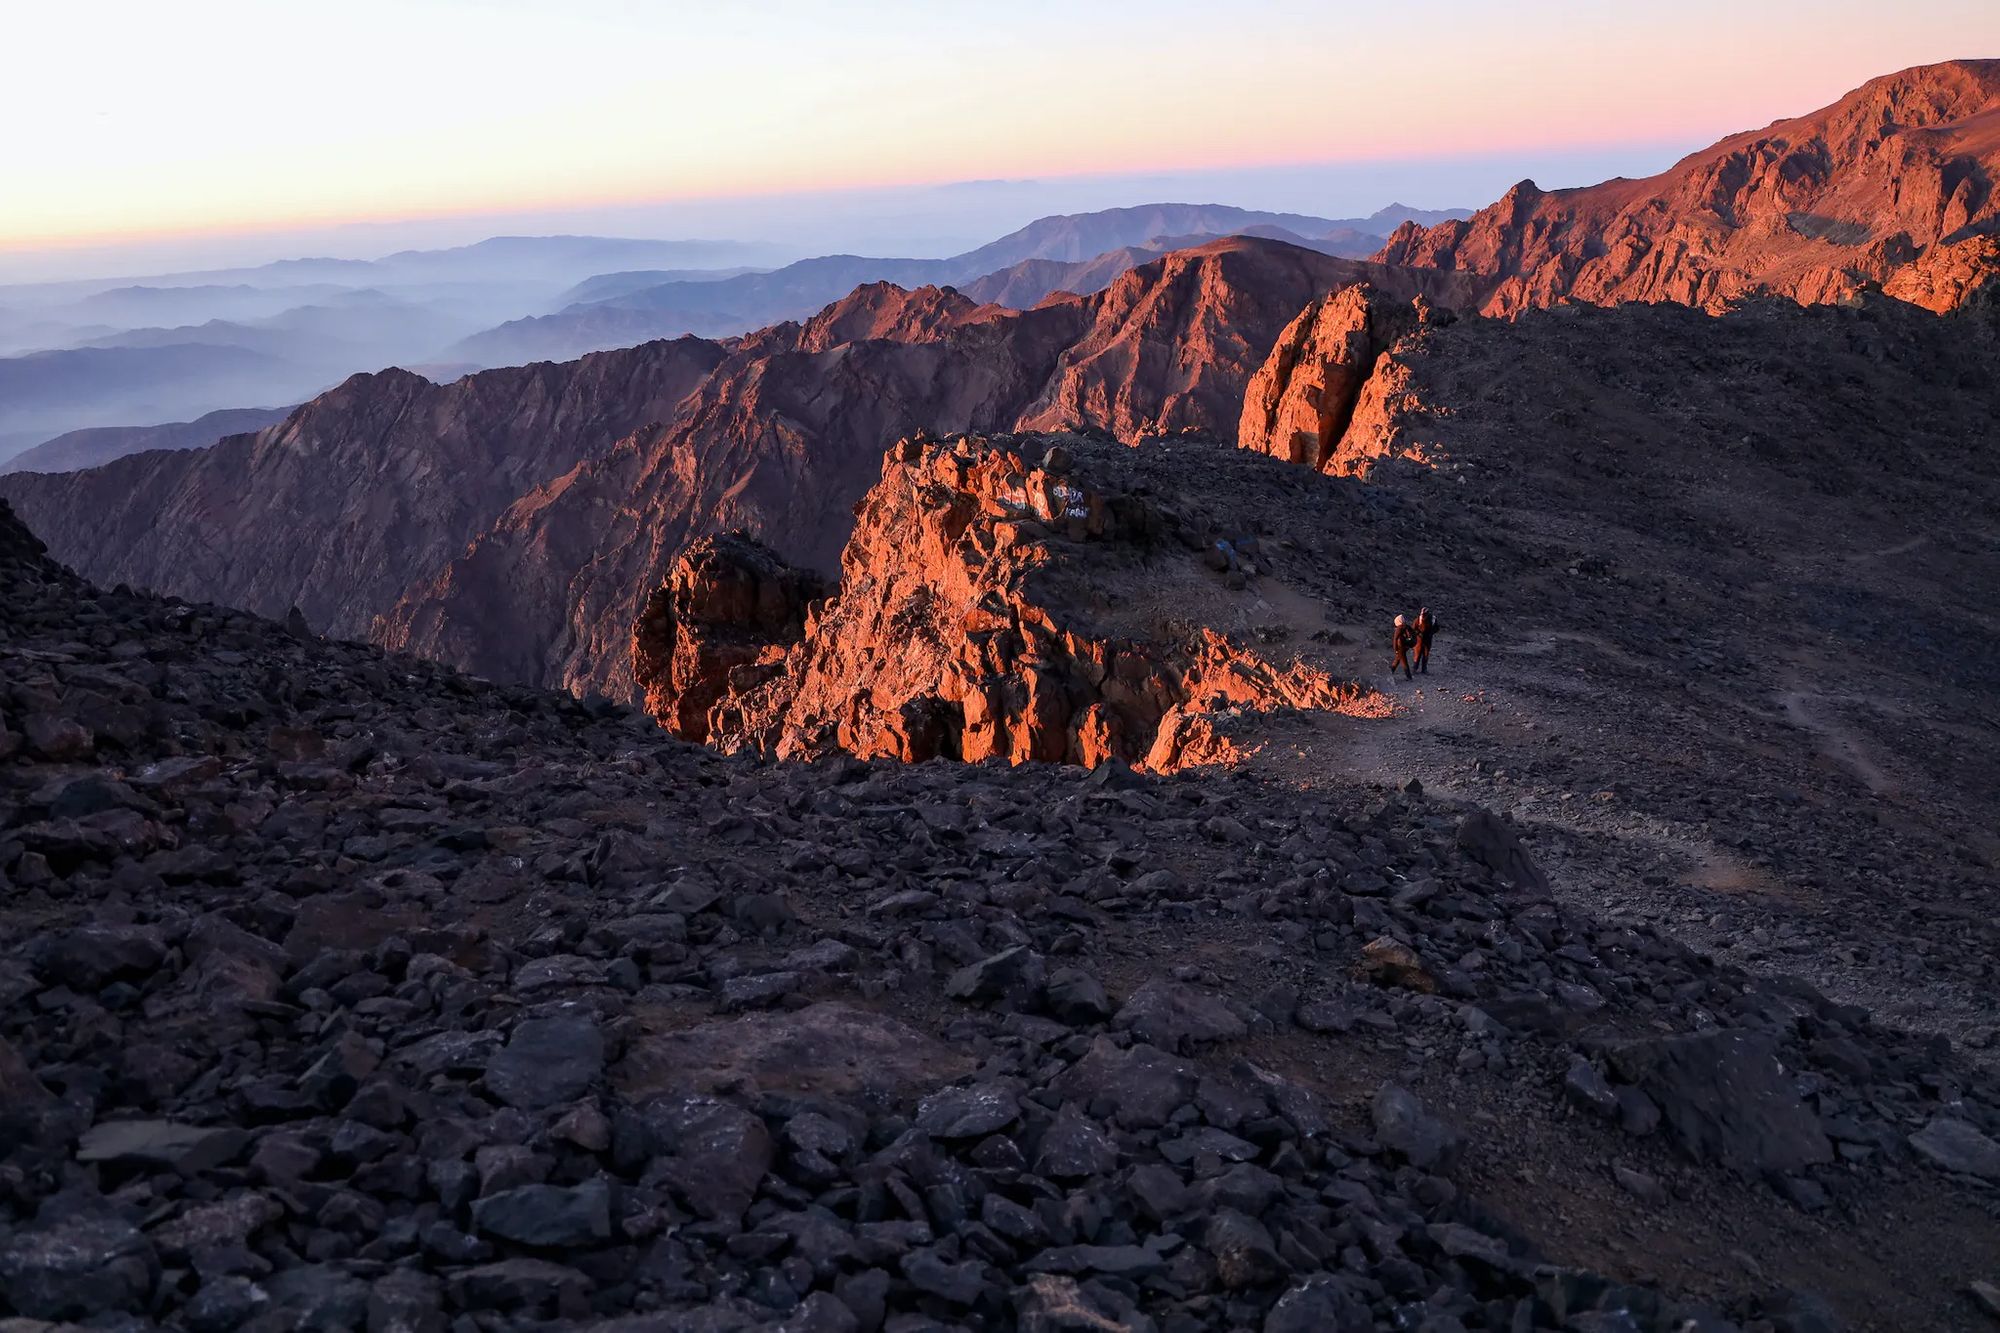 Sunrise views on the trail up Mount Ouanoukrim, in Morocco's High Atlas Mountains